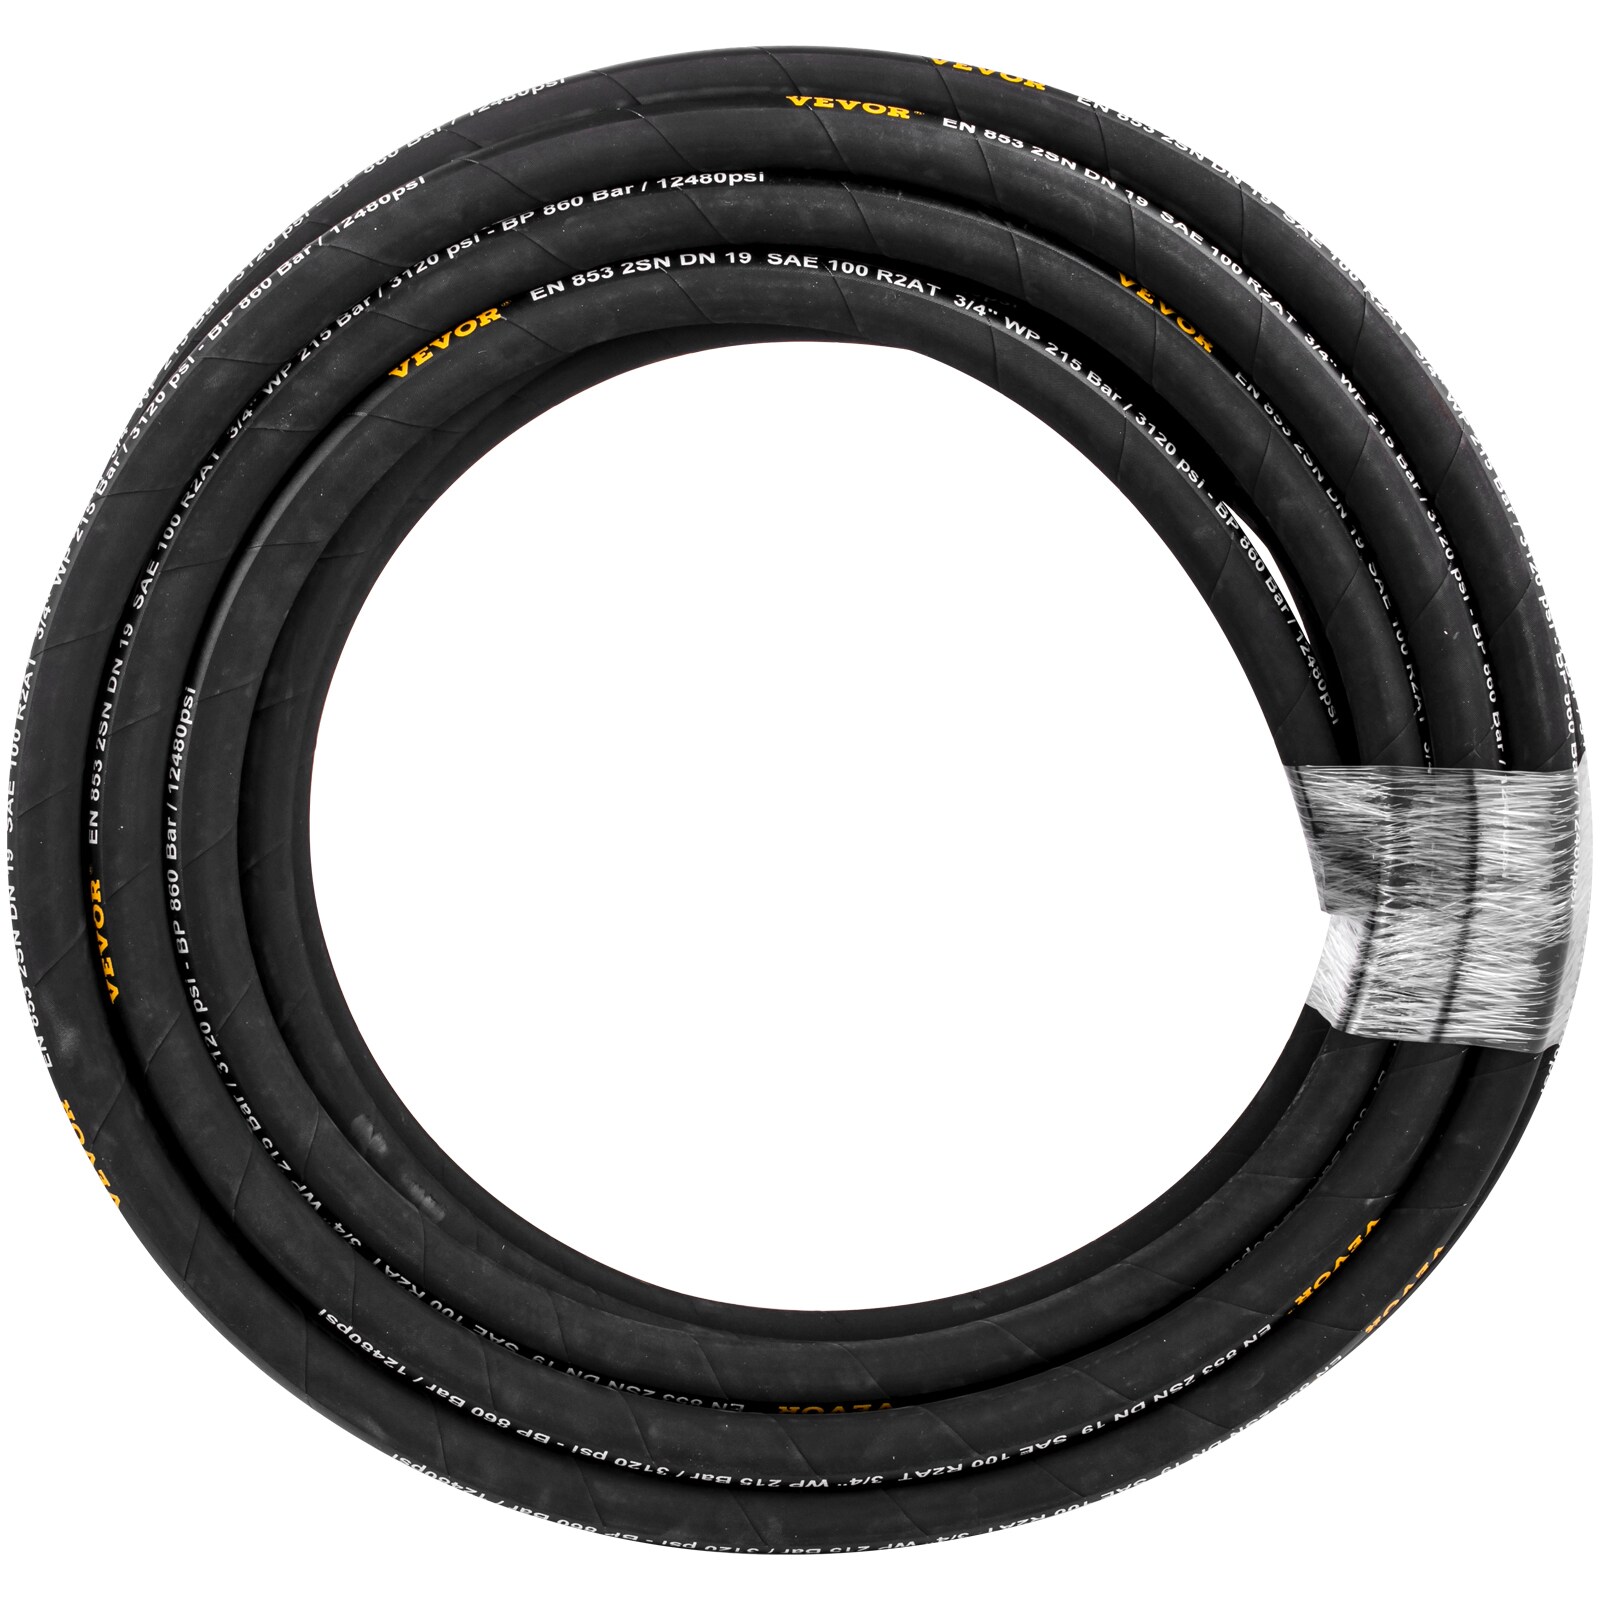 VEVOR 3/4-in ID x 50-ft Fabric/Synthetic Rubber Black Hydraulic Hose